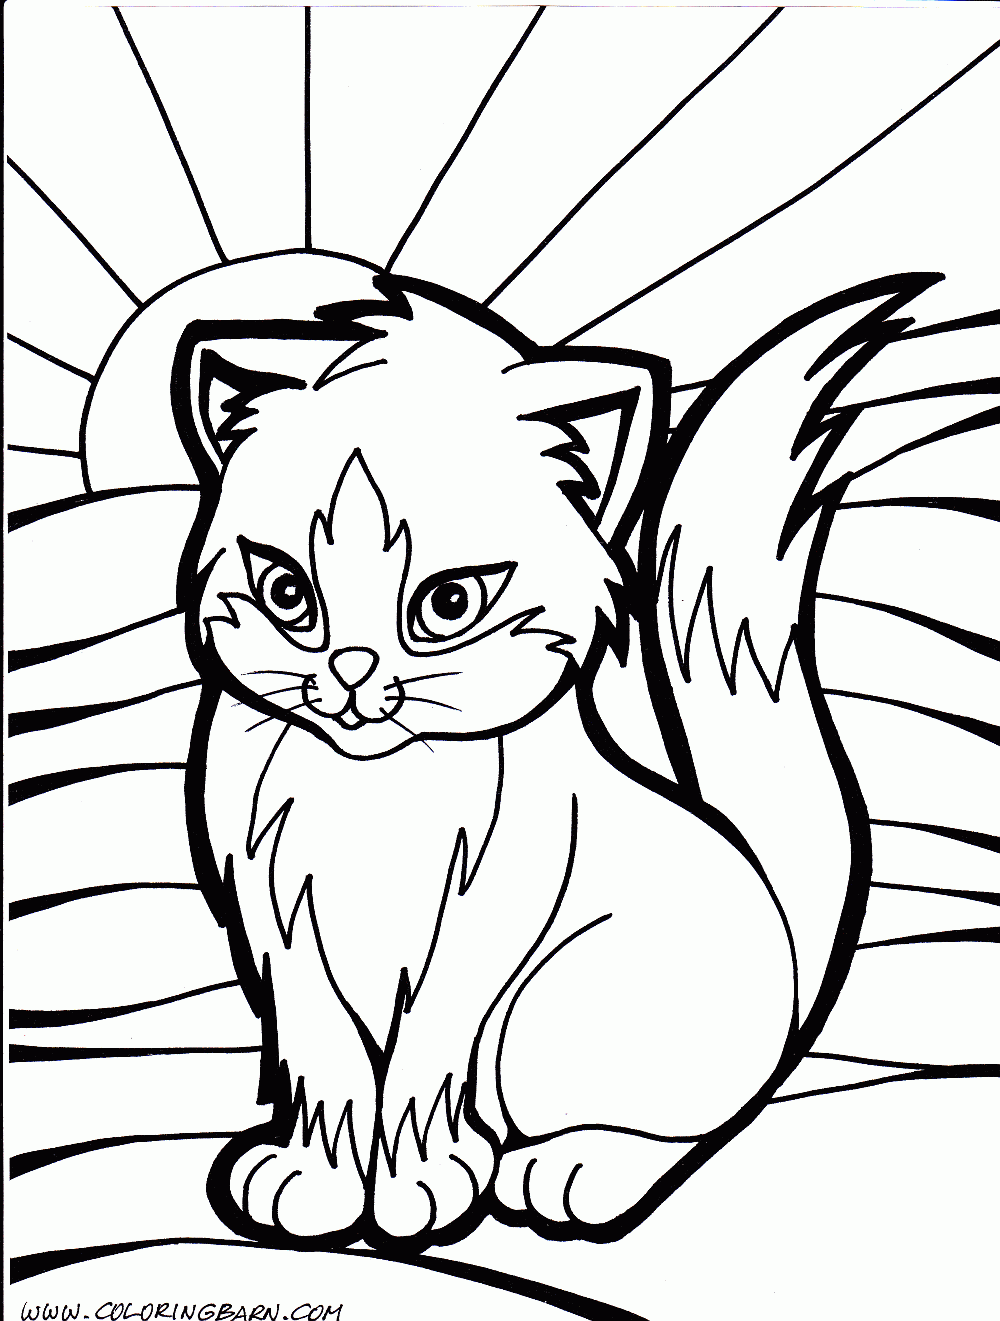 Download A Simple Free Printable Cat Coloring Sheet